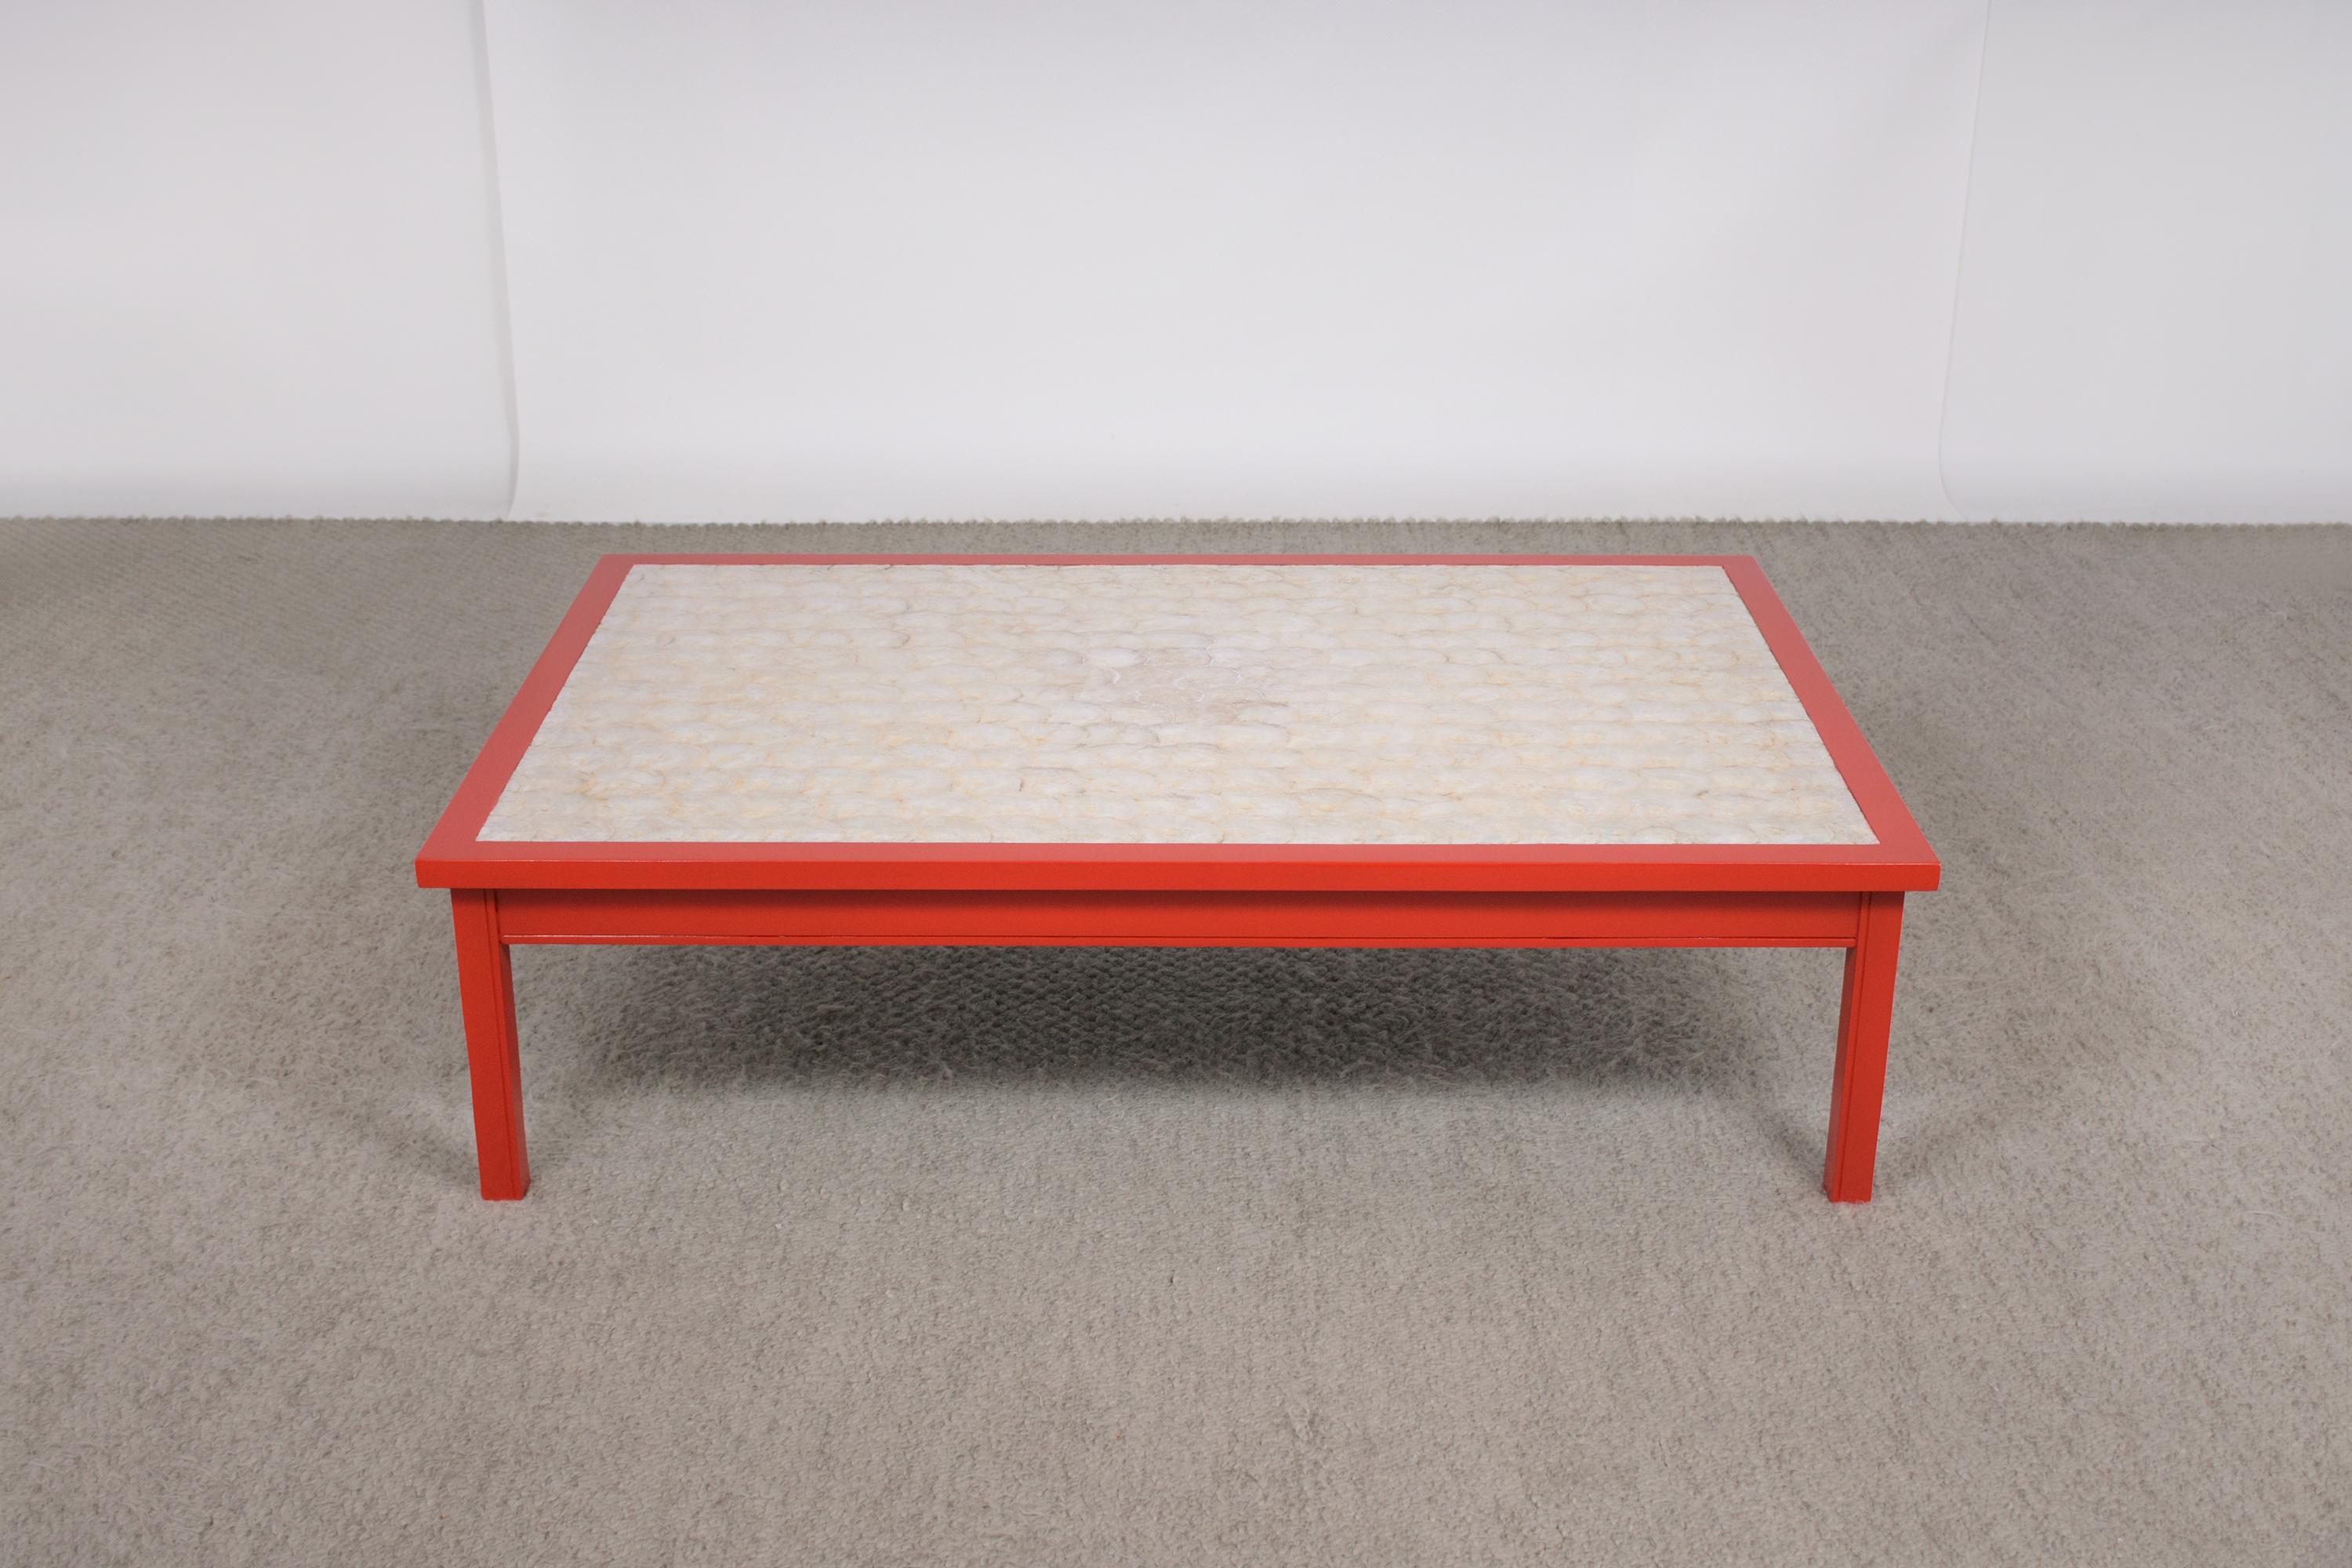 Step into the vibrant world of mid-century design with our stunning red coffee table, a piece that exudes style and history. Expertly restored by our seasoned craftsmen, this table is handcrafted from wood and revitalized to showcase its mid-century